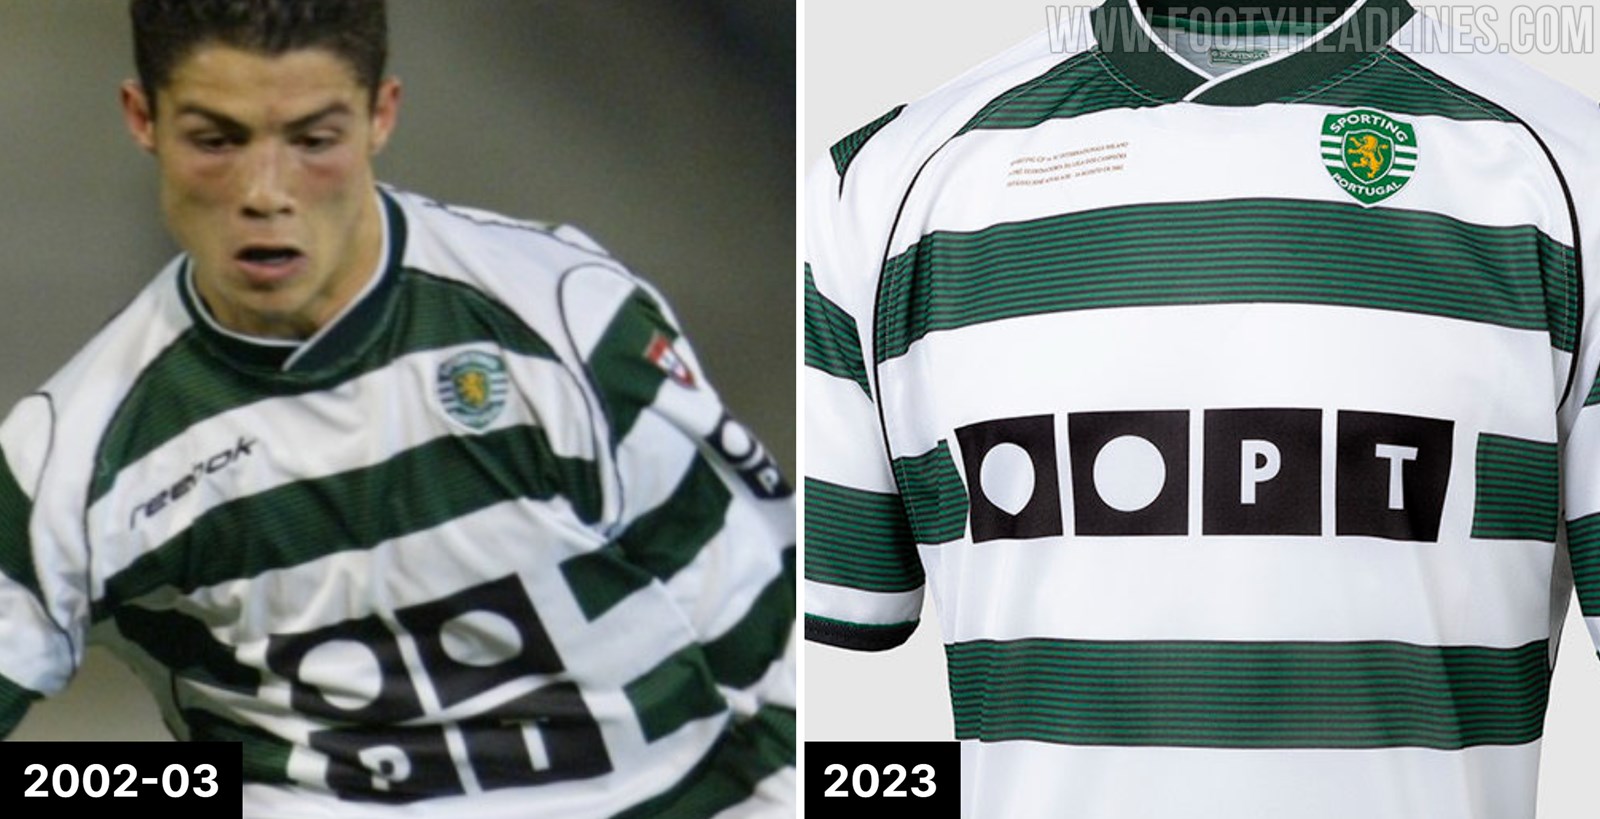 How to buy special Cristiano Ronaldo jersey by Sporting CP: Portuguese club  honour star with new shirt